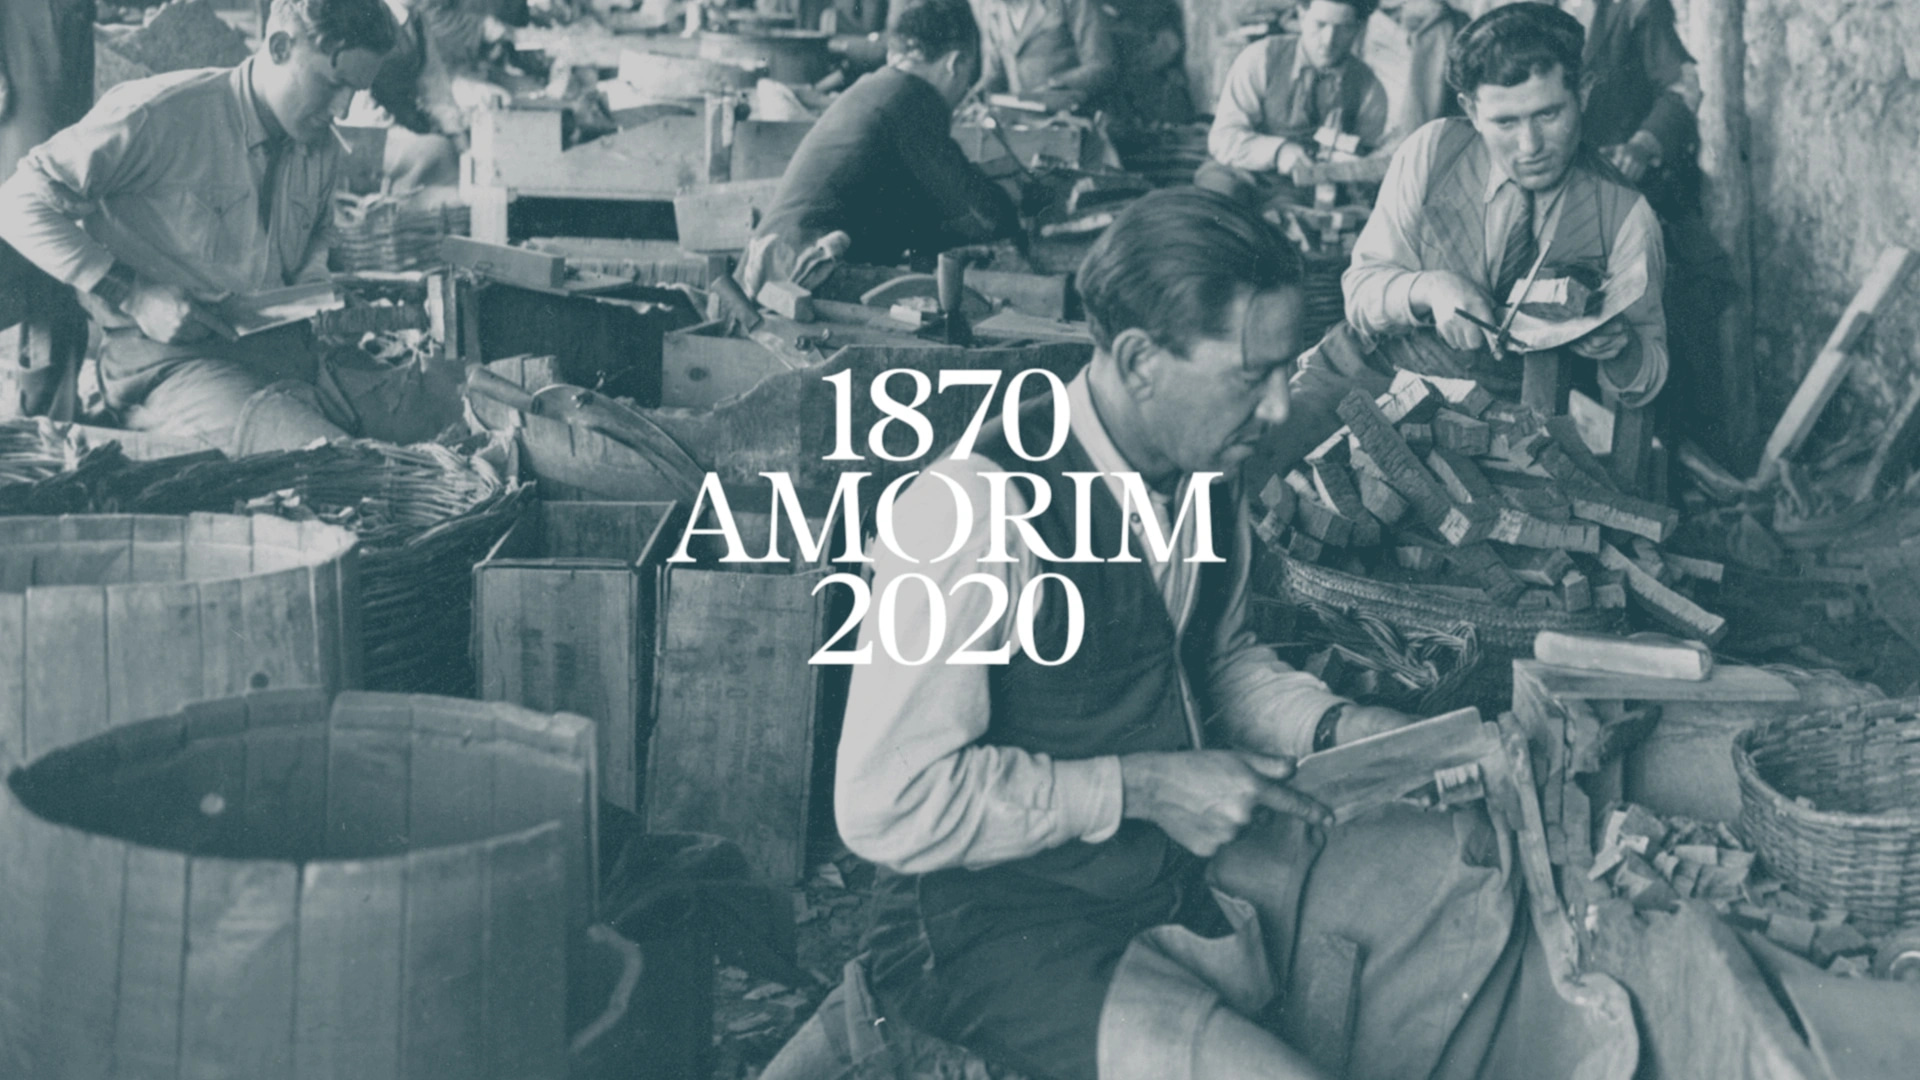 Image taken from the Amorim motion film, an old photography of people working with cork. The logo celebrating the 150 anniversary of Amorim is in the center: 1870 Amorim 2020.